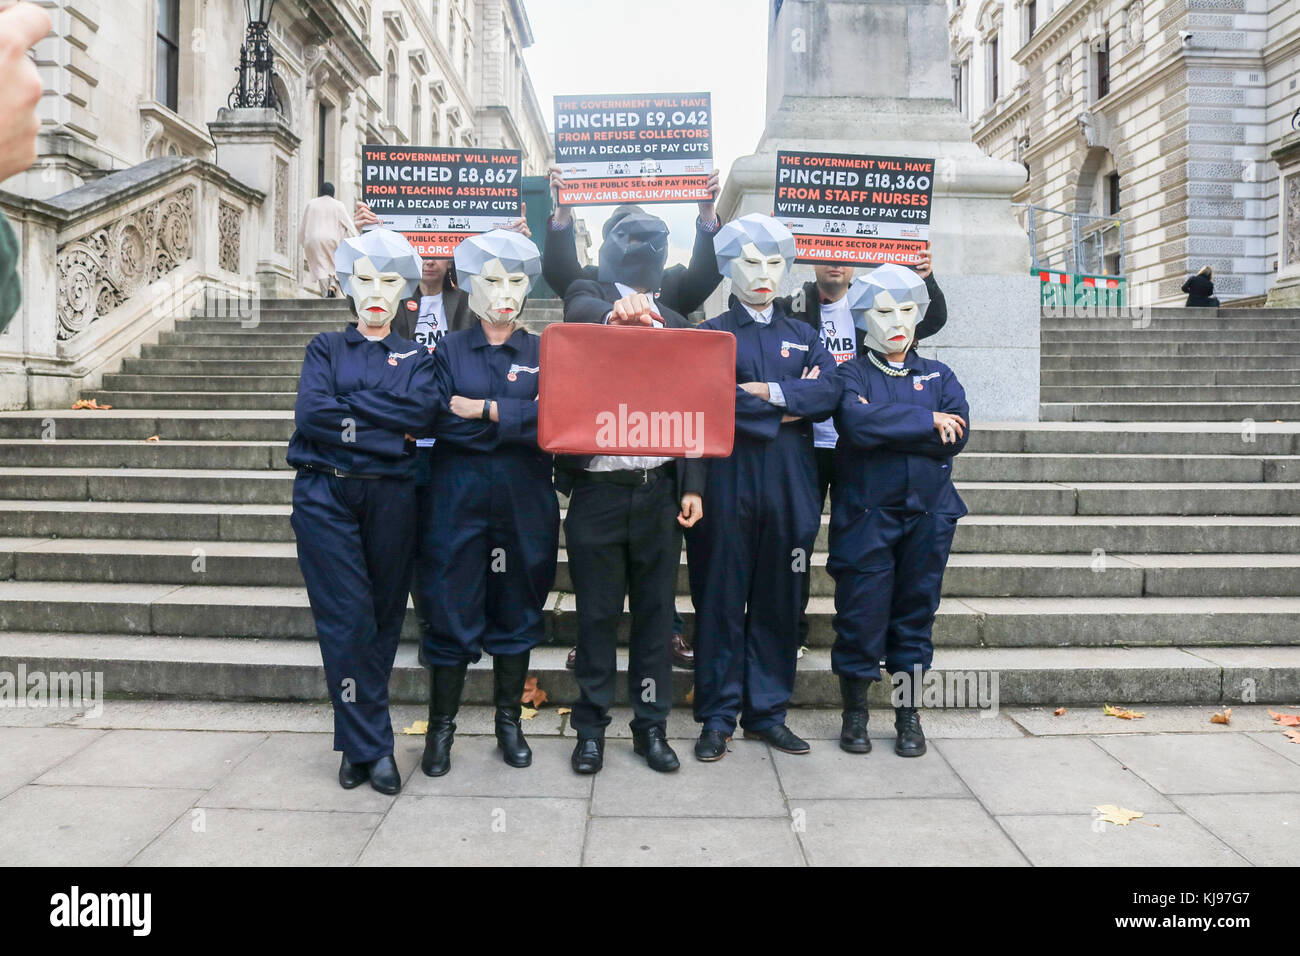 London, UK. 22nd Nov, 2017. GMB Union members  dressed as 'Theresa May' Maybot  memes protest against government austerity and public sector pay cuts as Chancellor Philip Hammond prepares to deliver his budget to Parliament Credit: amer ghazzal/Alamy Live News Stock Photo